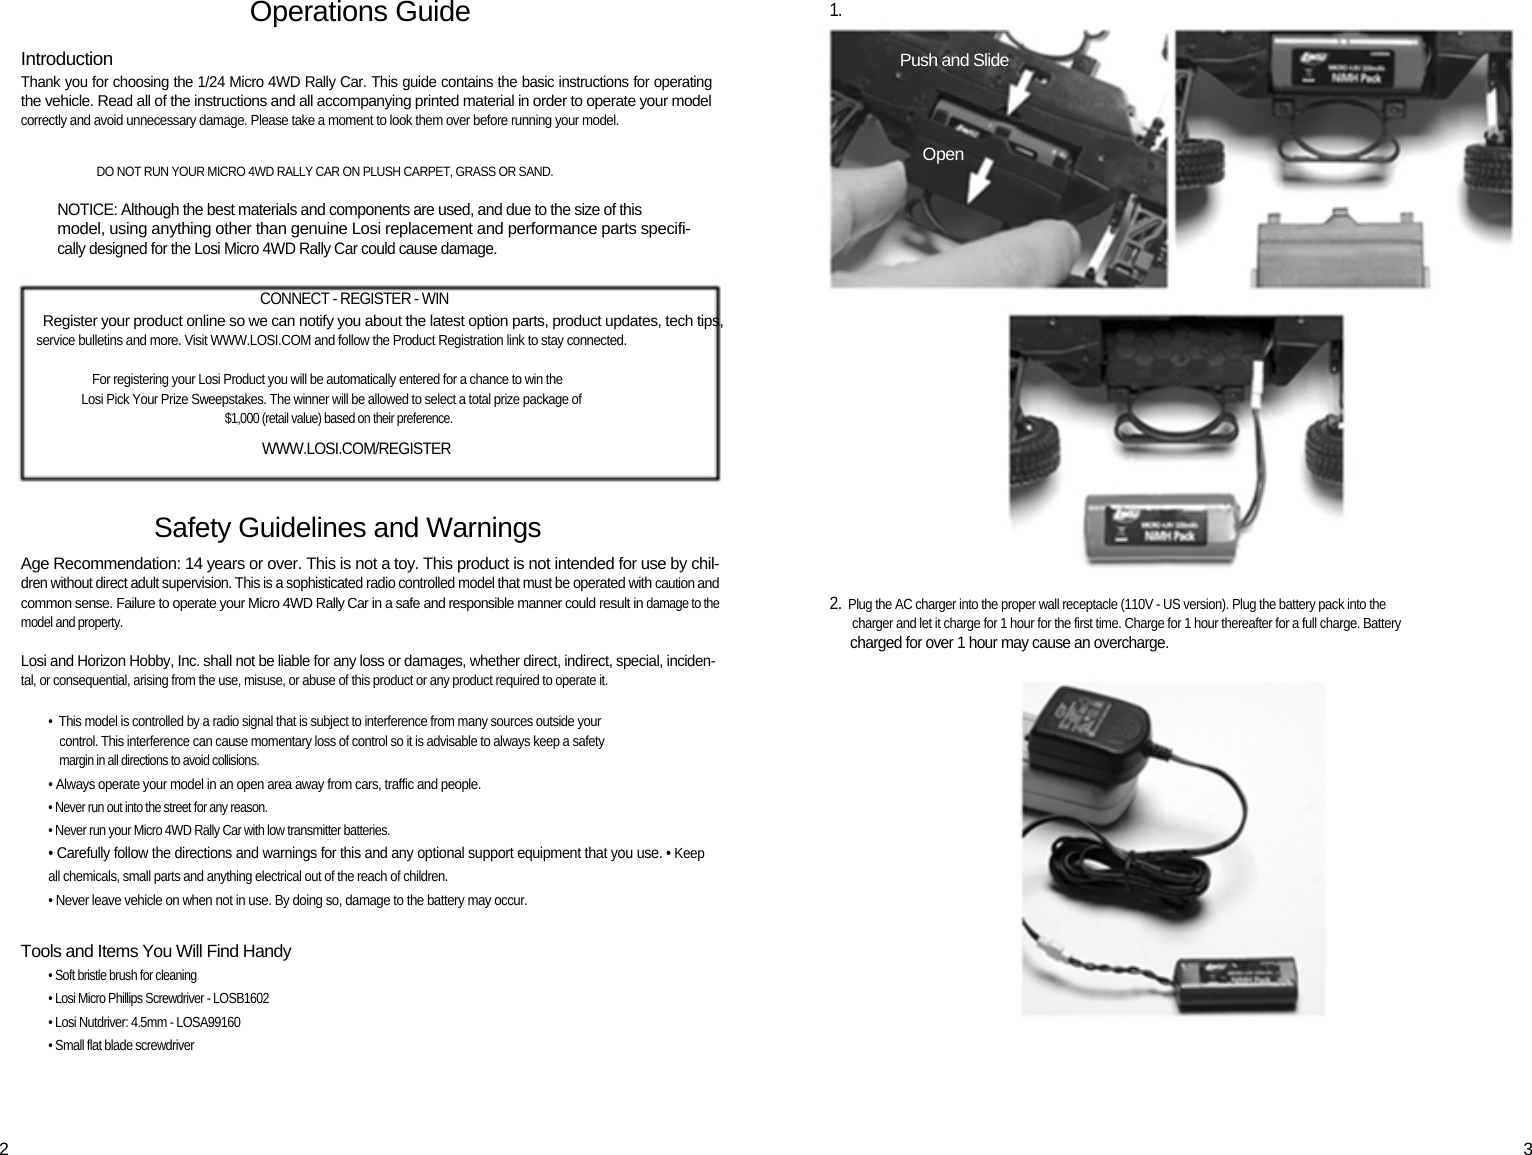 Operations Guide Introduction Thank you for choosing the 1/24 Micro 4WD Rally Car. This guide contains the basic instructions for operating  the vehicle. Read all of the instructions and all accompanying printed material in order to operate your model correctly and avoid unnecessary damage. Please take a moment to look them over before running your model.   DO NOT RUN YOUR MICRO 4WD RALLY CAR ON PLUSH CARPET, GRASS OR SAND.  NOTICE: Although the best materials and components are used, and due to the size of this model, using anything other than genuine Losi replacement and performance parts specifi- cally designed for the Losi Micro 4WD Rally Car could cause damage.  CONNECT - REGISTER - WIN Register your product online so we can notify you about the latest option parts, product updates, tech tips, service bulletins and more. Visit WWW.LOSI.COM and follow the Product Registration link to stay connected.  For registering your Losi Product you will be automatically entered for a chance to win the Losi Pick Your Prize Sweepstakes. The winner will be allowed to select a total prize package of $1,000 (retail value) based on their preference. WWW.LOSI.COM/REGISTER  Safety Guidelines and Warnings Age Recommendation: 14 years or over. This is not a toy. This product is not intended for use by chil- dren without direct adult supervision. This is a sophisticated radio controlled model that must be operated with caution and common sense. Failure to operate your Micro 4WD Rally Car in a safe and responsible manner could result in damage to the model and property.  Losi and Horizon Hobby, Inc. shall not be liable for any loss or damages, whether direct, indirect, special, inciden- tal, or consequential, arising from the use, misuse, or abuse of this product or any product required to operate it.  •  This model is controlled by a radio signal that is subject to interference from many sources outside your control. This interference can cause momentary loss of control so it is advisable to always keep a safety margin in all directions to avoid collisions. • Always operate your model in an open area away from cars, traffic and people. • Never run out into the street for any reason. • Never run your Micro 4WD Rally Car with low transmitter batteries. • Carefully follow the directions and warnings for this and any optional support equipment that you use. • Keep all chemicals, small parts and anything electrical out of the reach of children. • Never leave vehicle on when not in use. By doing so, damage to the battery may occur.  Tools and Items You Will Find Handy • Soft bristle brush for cleaning • Losi Micro Phillips Screwdriver - LOSB1602 • Losi Nutdriver: 4.5mm - LOSA99160 • Small flat blade screwdriver 1. Push and Slide Open 2.  Plug the AC charger into the proper wall receptacle (110V - US version). Plug the battery pack into the    charger and let it charge for 1 hour for the first time. Charge for 1 hour thereafter for a full charge. Battery charged for over 1 hour may cause an overcharge.  2  3